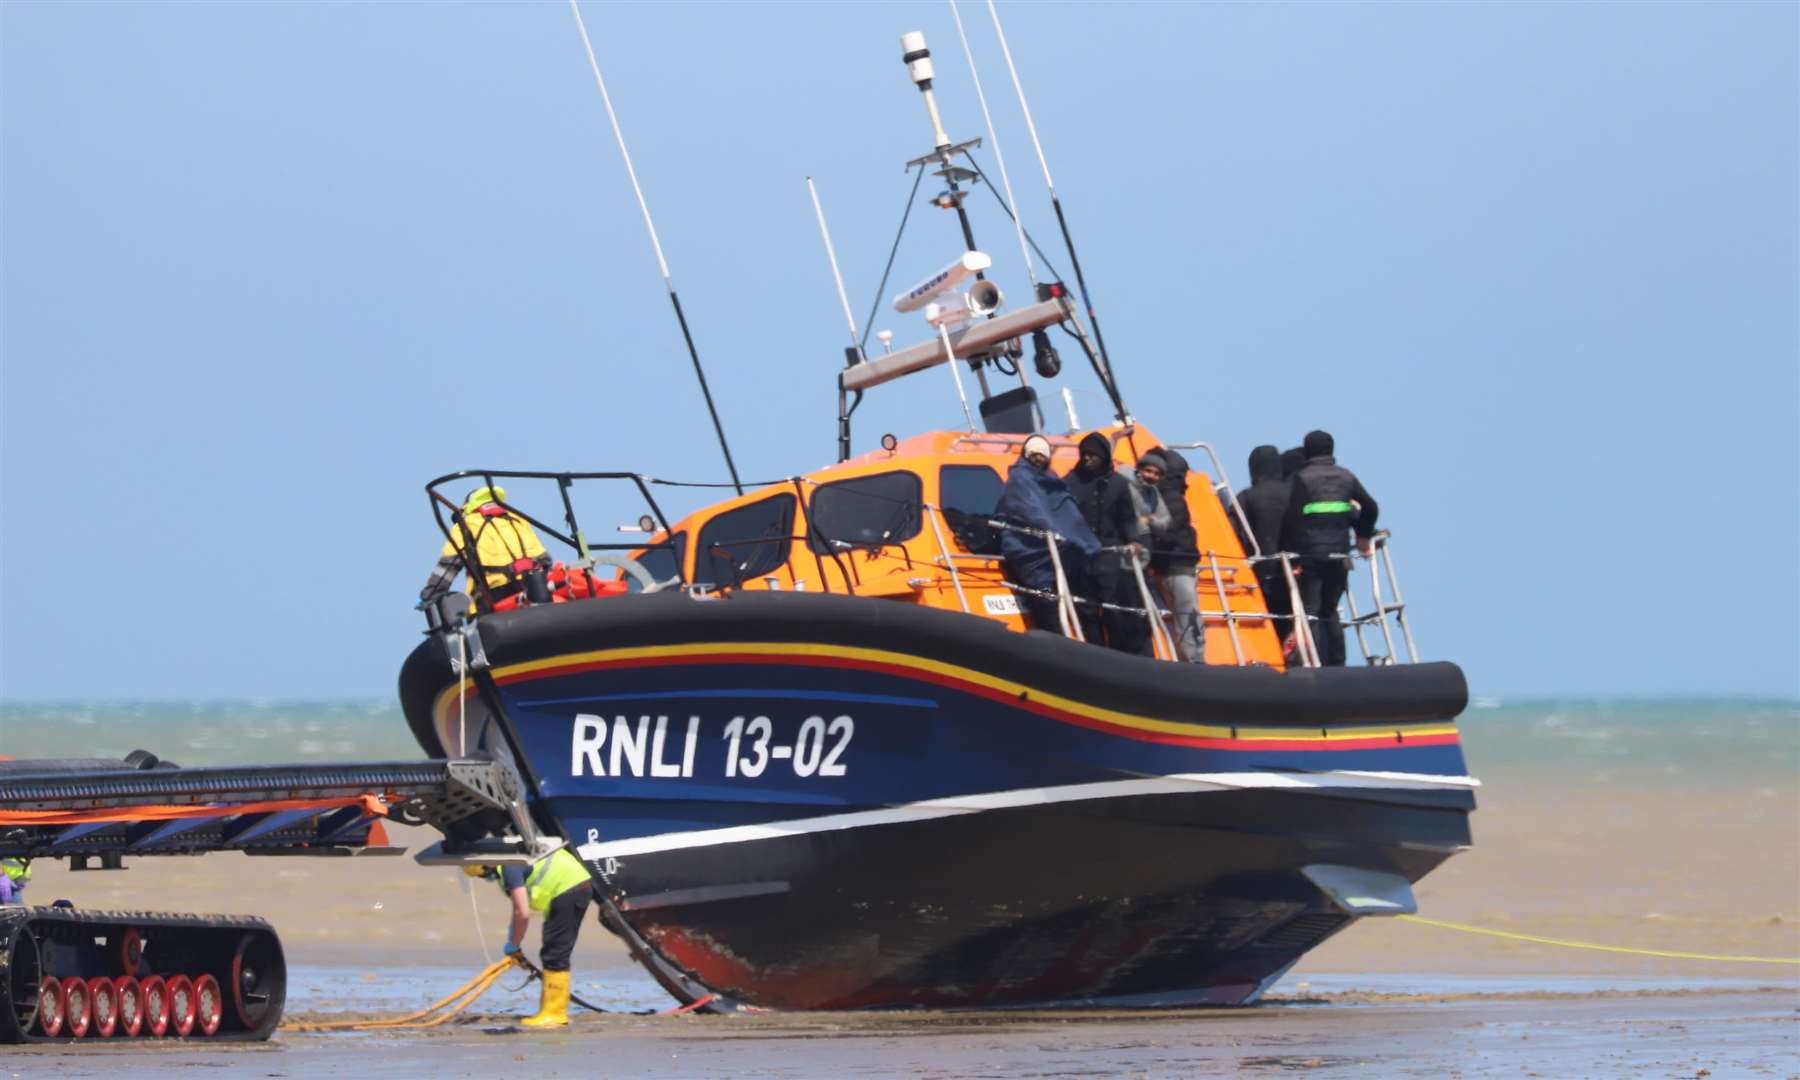 The RNLI were involved in the incident at Dungeness File image